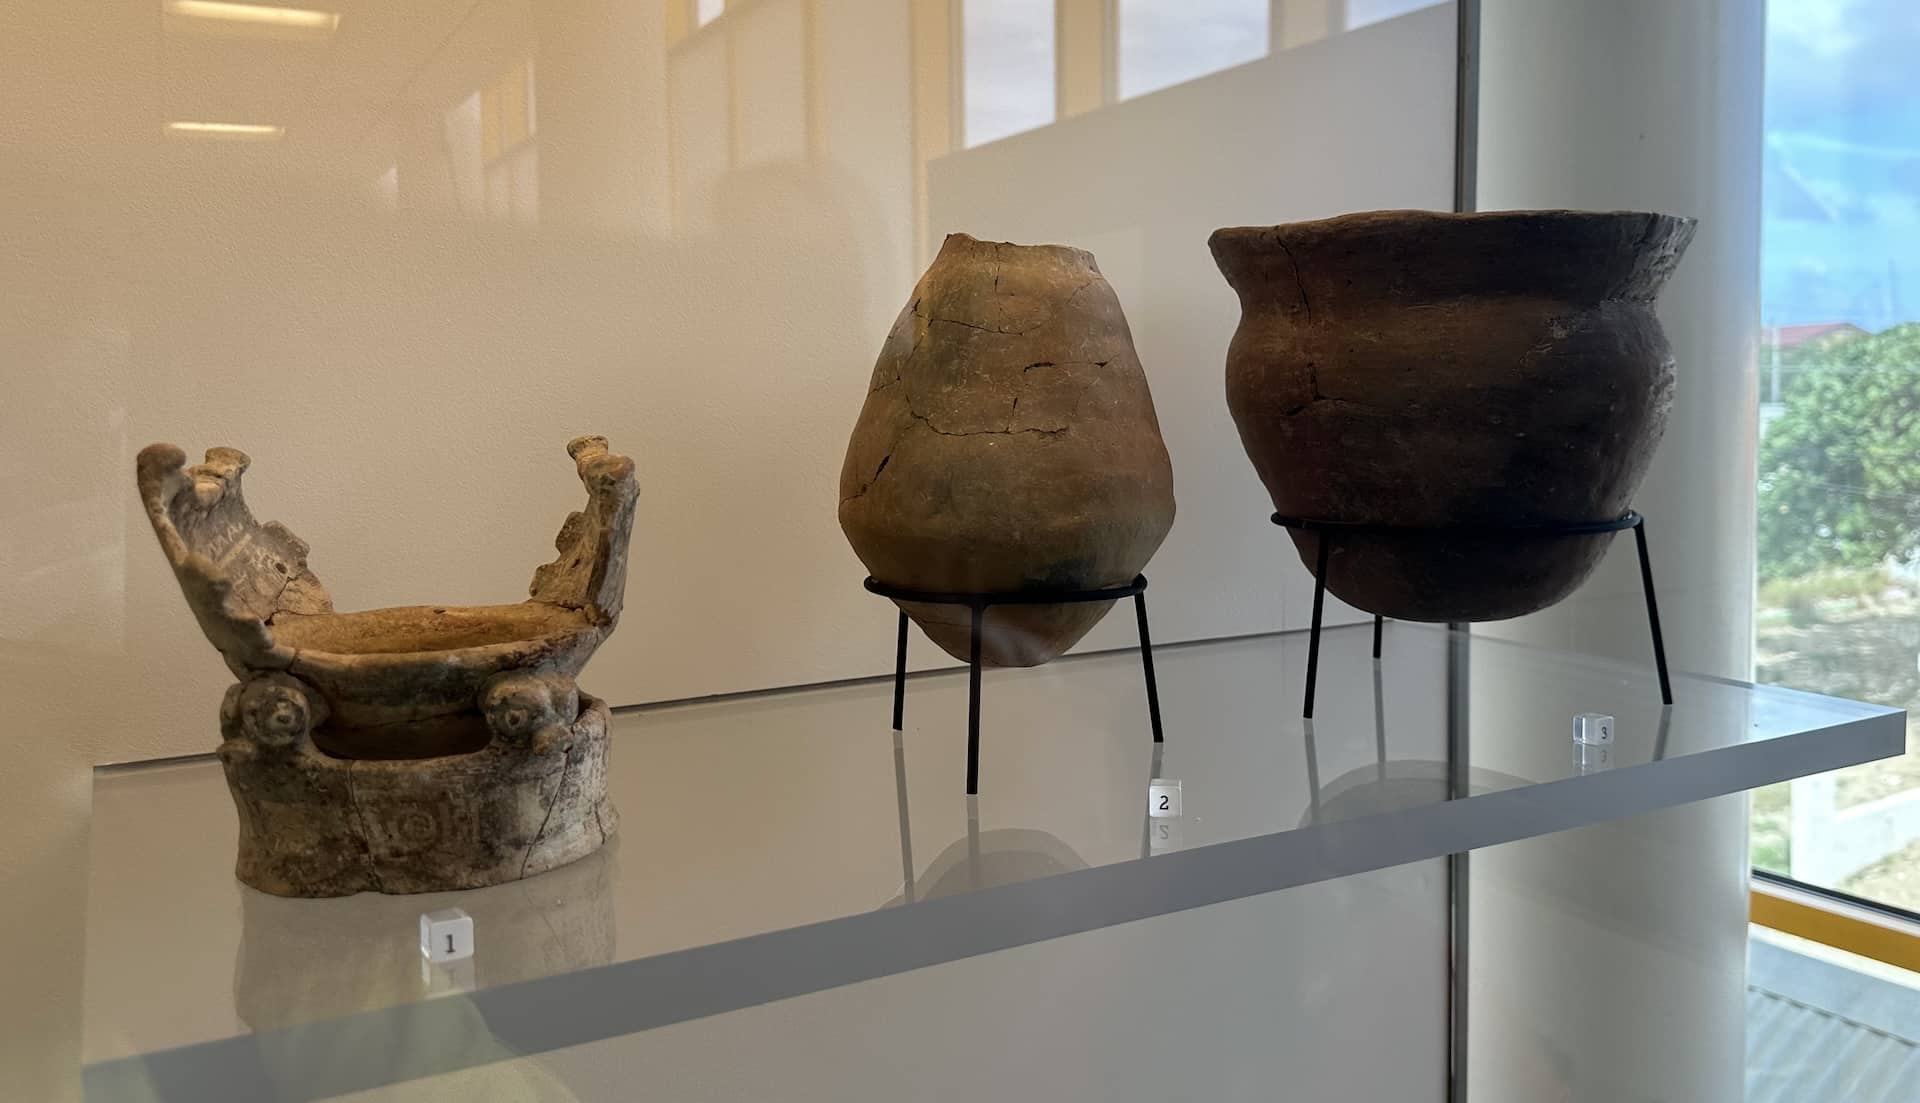 Ceremonial bowl (left) and burial urns (center and right) at the National Archaeological Museum